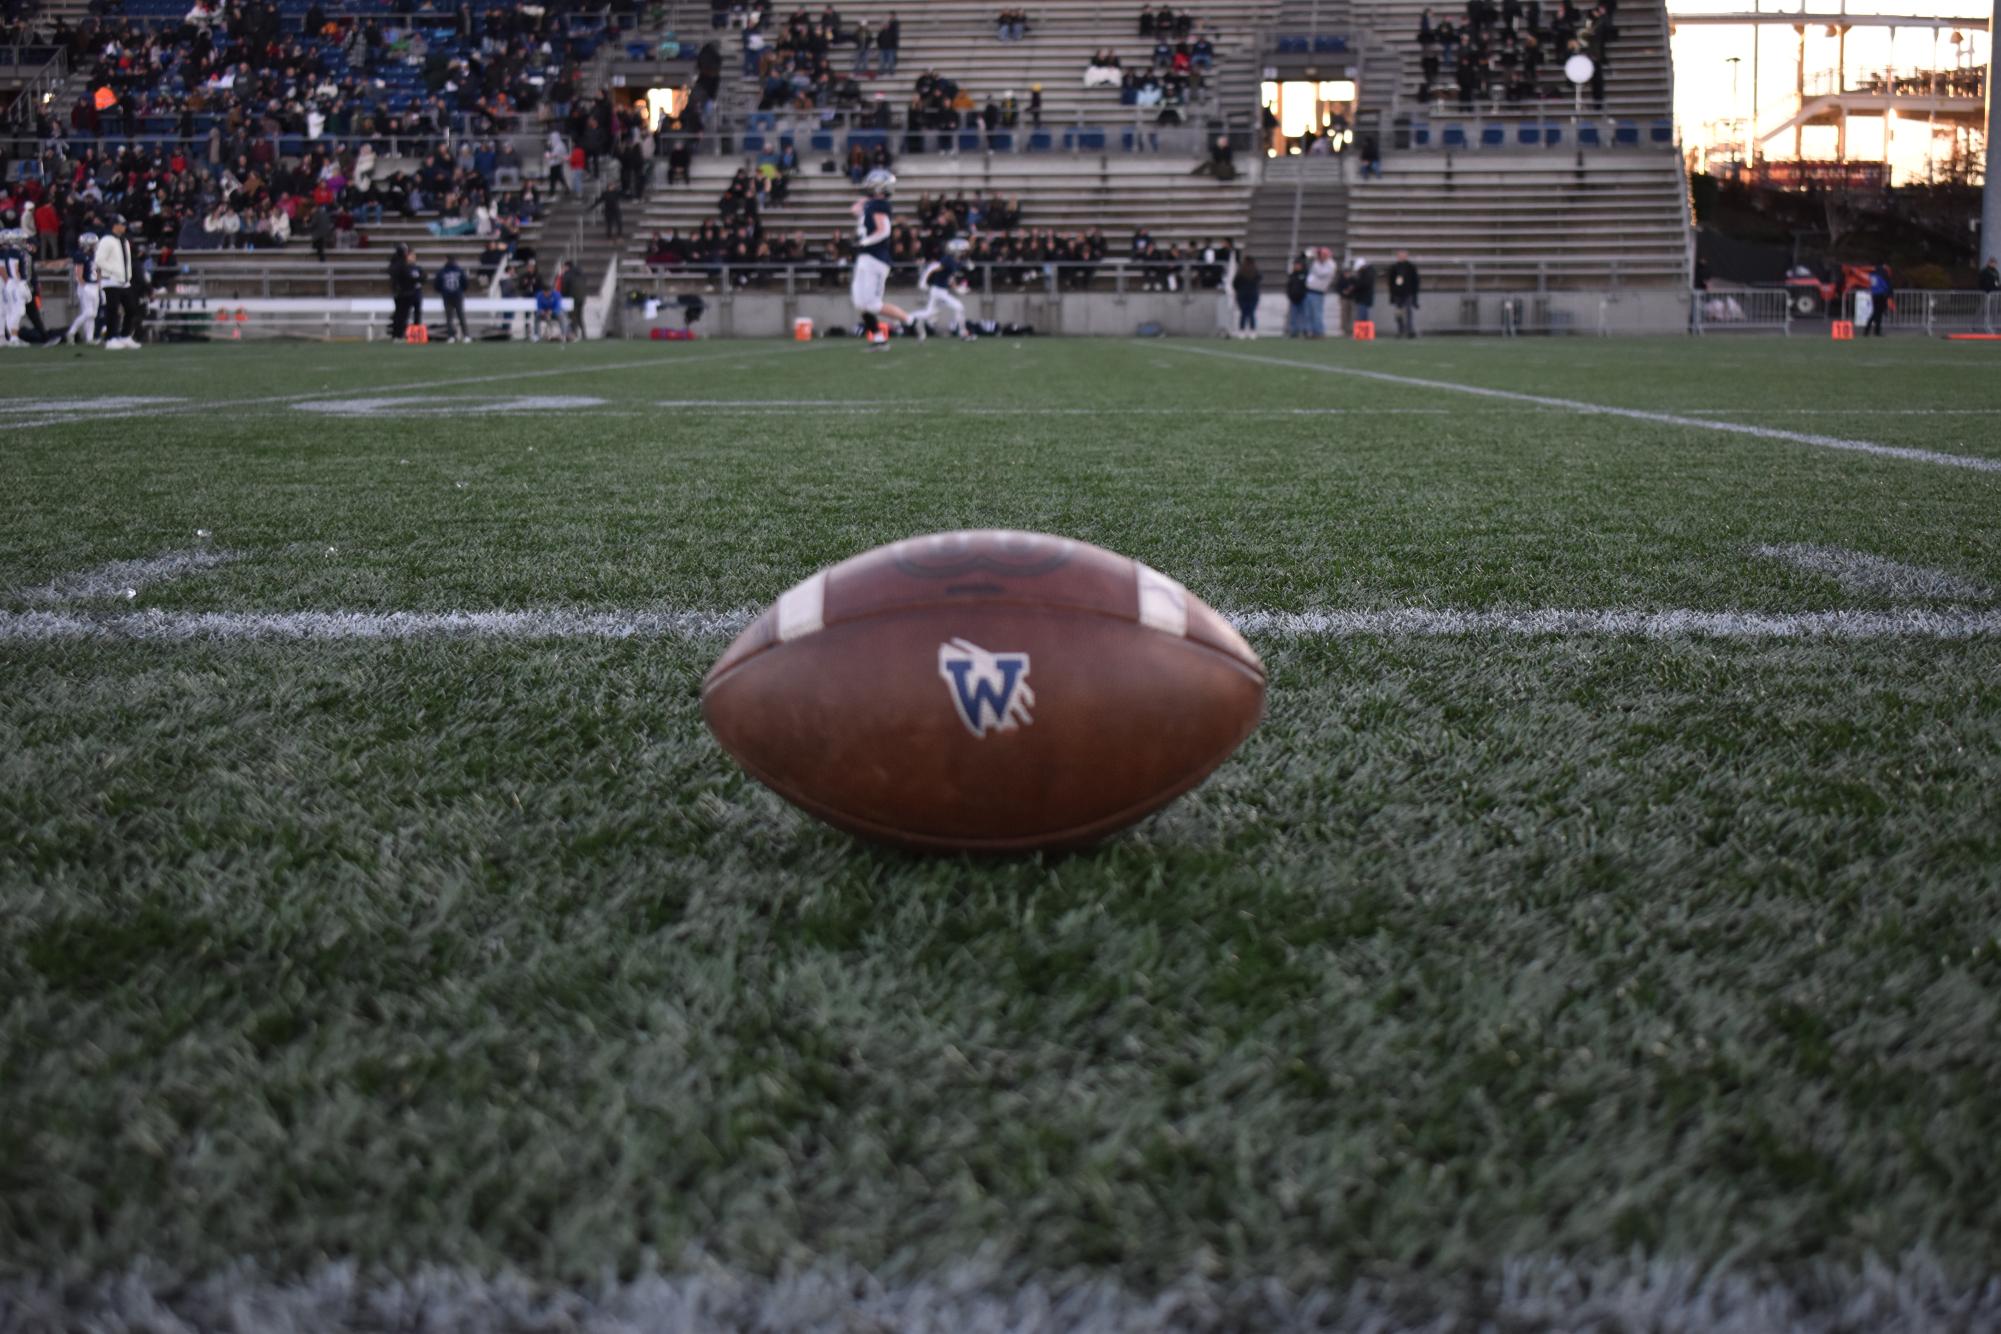 A Wilsonville football lays on the sideline as the team warms up in the background. The State Final matchup started at 4:30 p.m. with a beautiful sunset as the backdrop for the game.